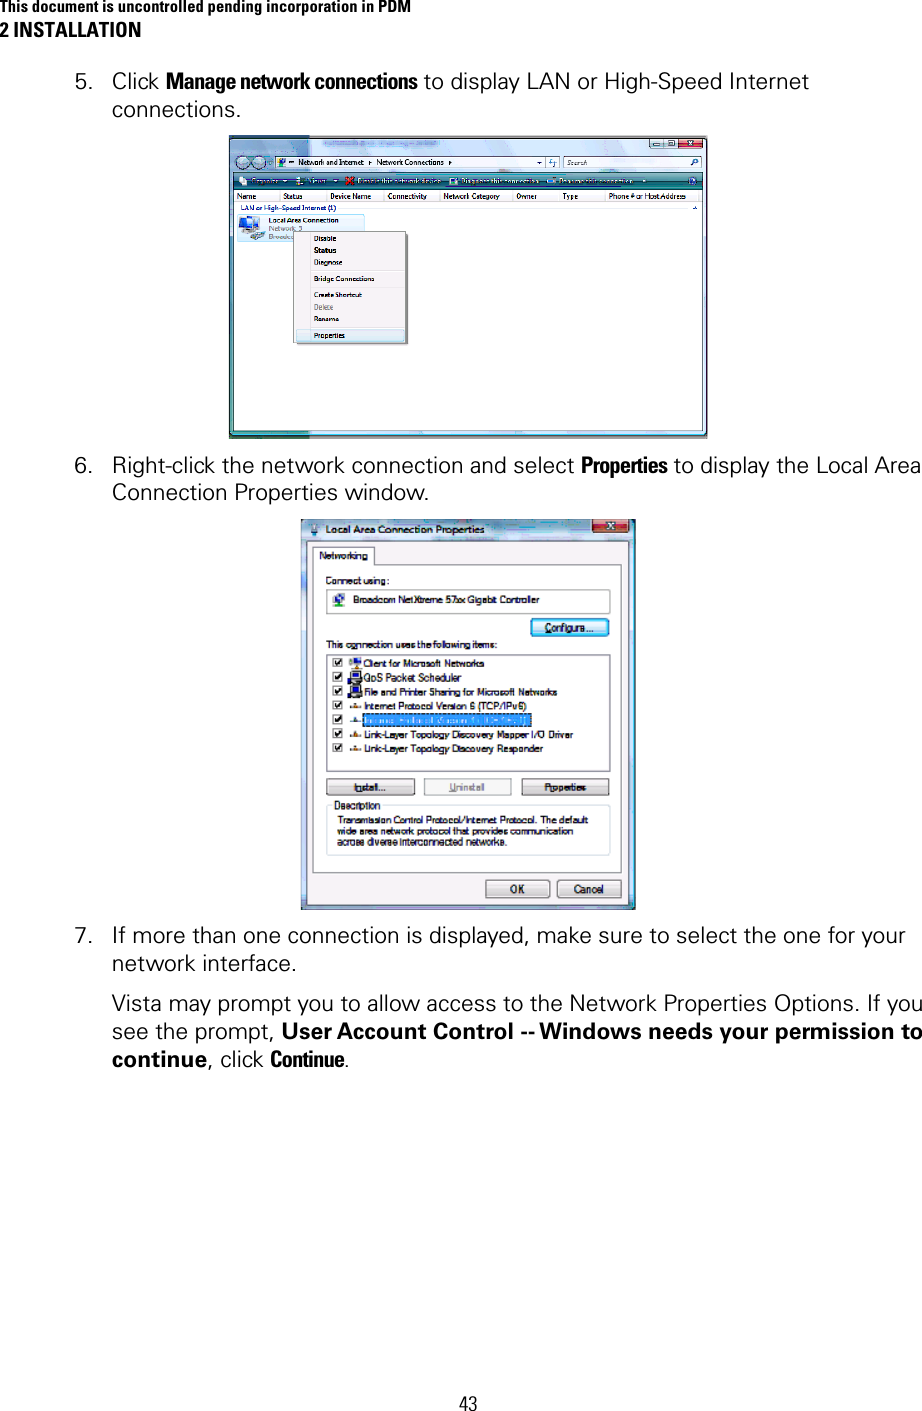 This document is uncontrolled pending incorporation in PDM 2 INSTALLATION  43 5. Click Manage network connections to display LAN or High-Speed Internet connections.  6. Right-click the network connection and select Properties to display the Local Area Connection Properties window.  7. If more than one connection is displayed, make sure to select the one for your network interface.  Vista may prompt you to allow access to the Network Properties Options. If you see the prompt, User Account Control -- Windows needs your permission to continue, click Continue. 